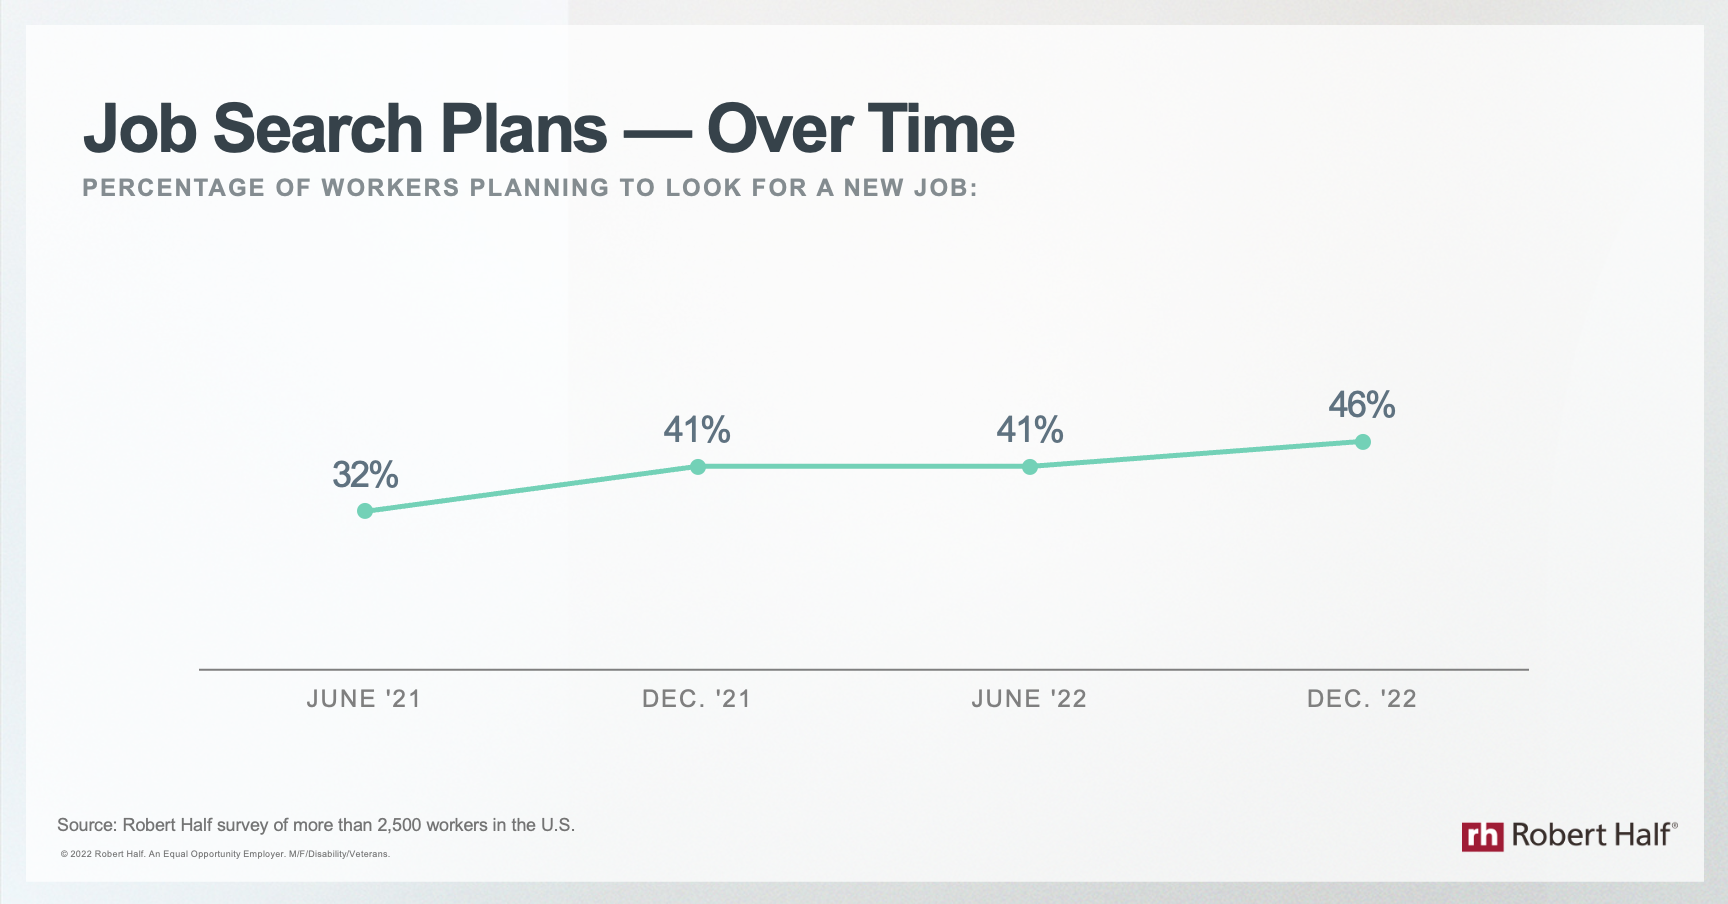 Job Search Plans - Over Time